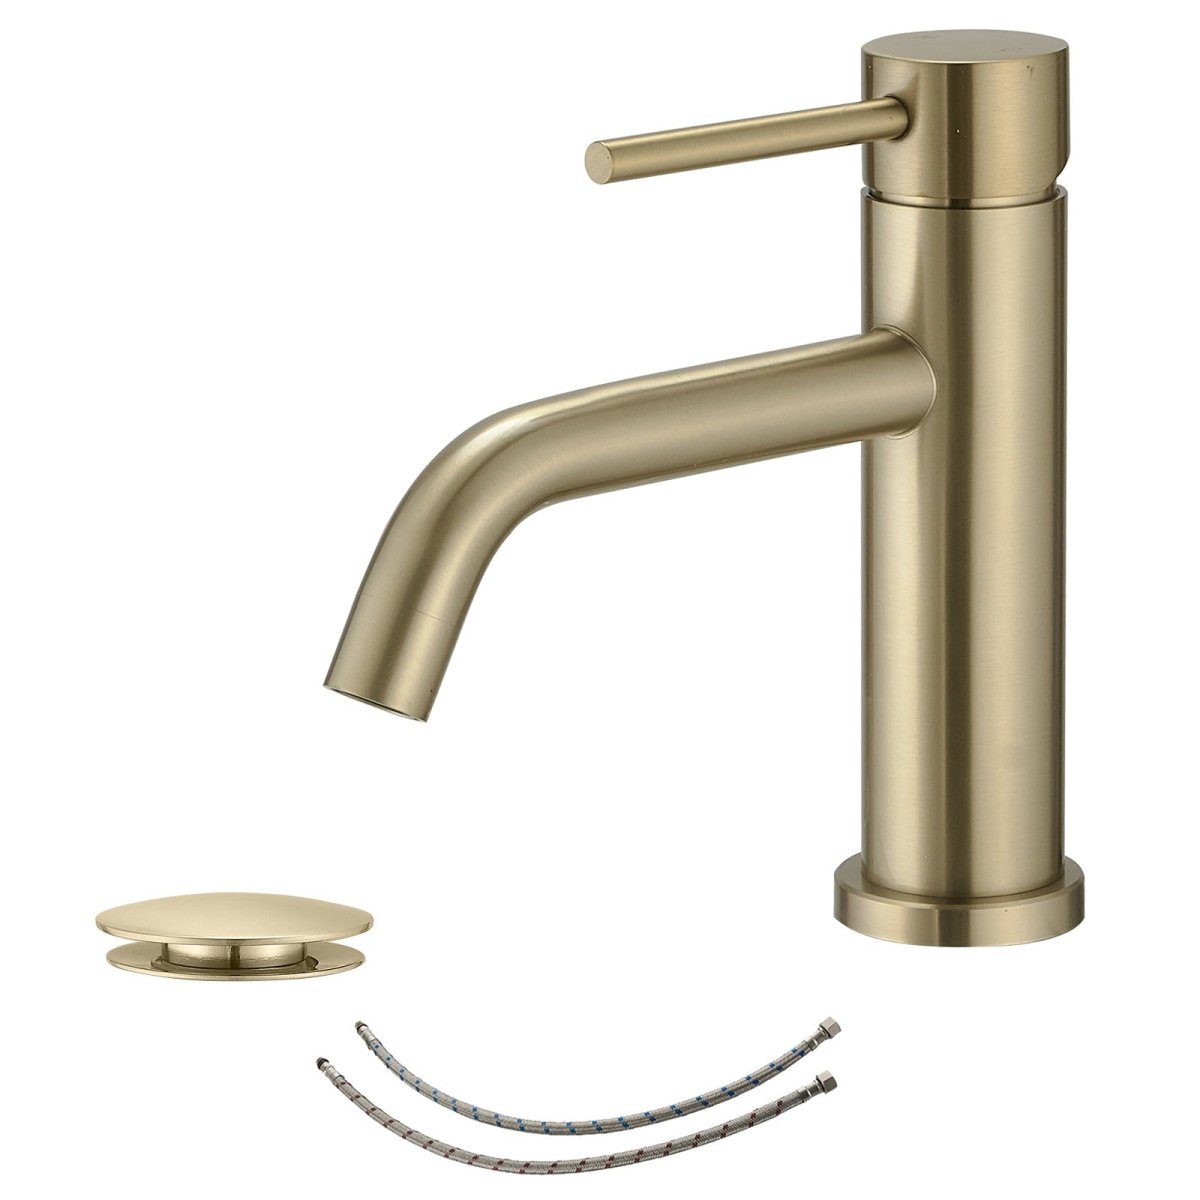 Low-Arc with Drain Assembly Drip-Free Bathroom Faucet Gold - buyfaucet.com